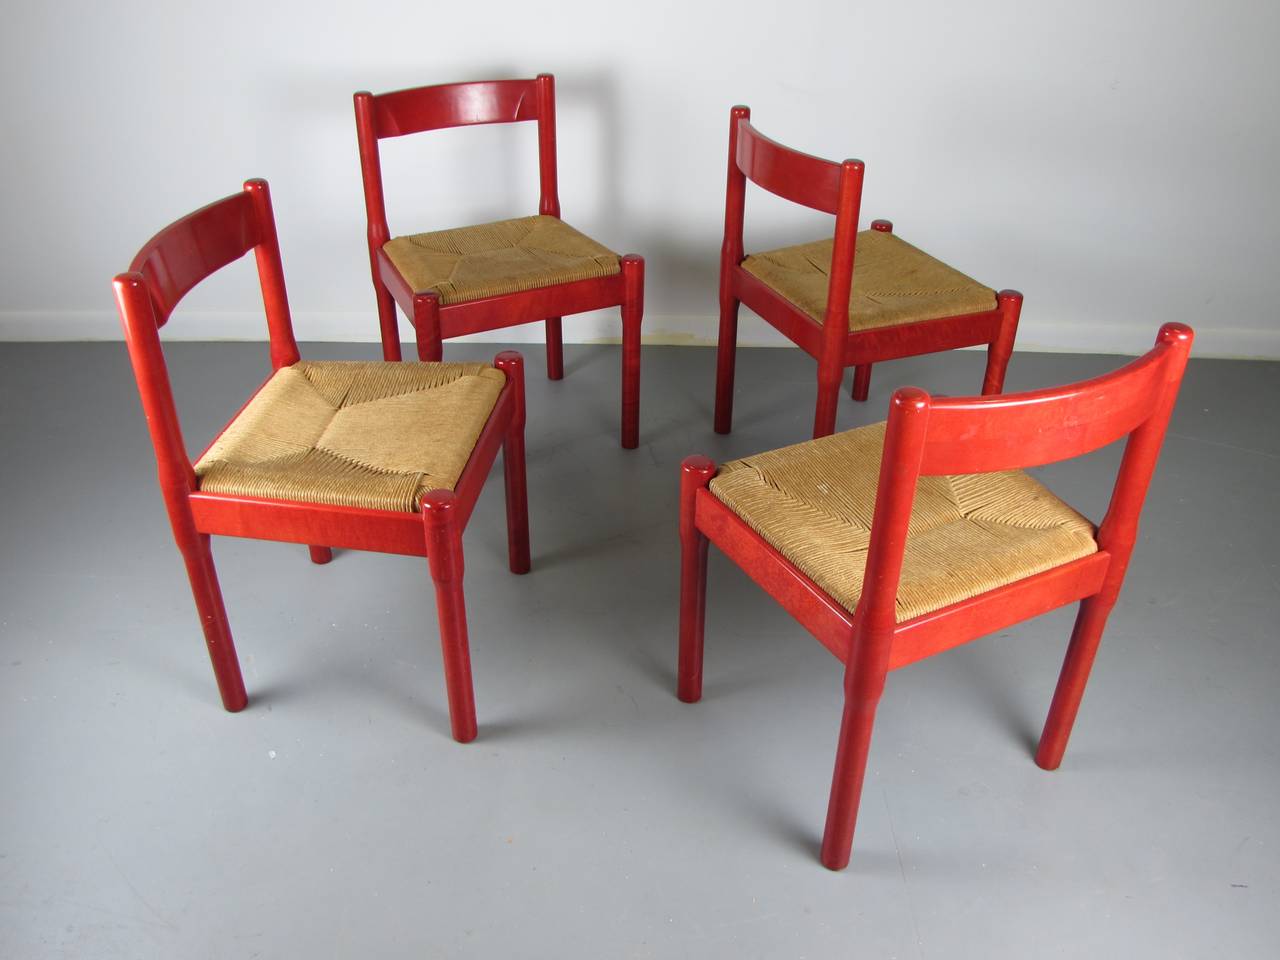 Rare set of red Carimate dining chairs by Vico Magistretti for Stendig, 1950s. These chairs are in excellent vintage condition. They appear to have seen very little use. The red stain finish is in excellent condition and rarely seen!

See this